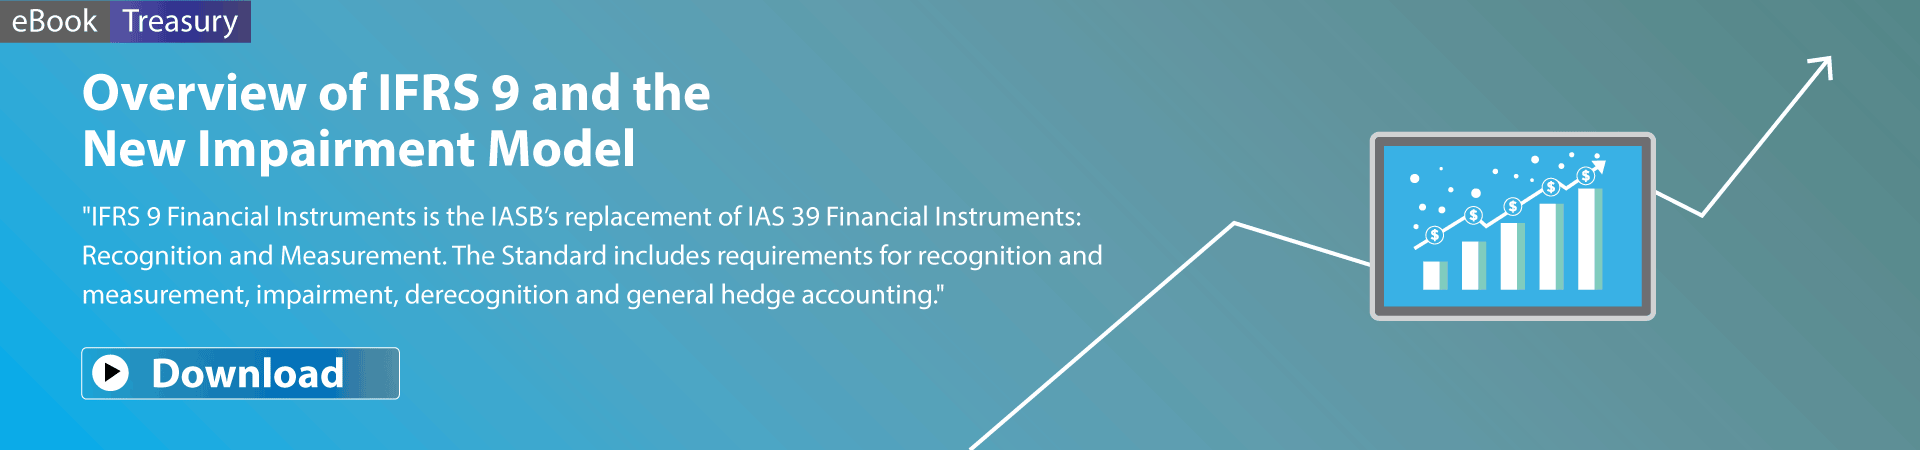 Overview of IFRS 9